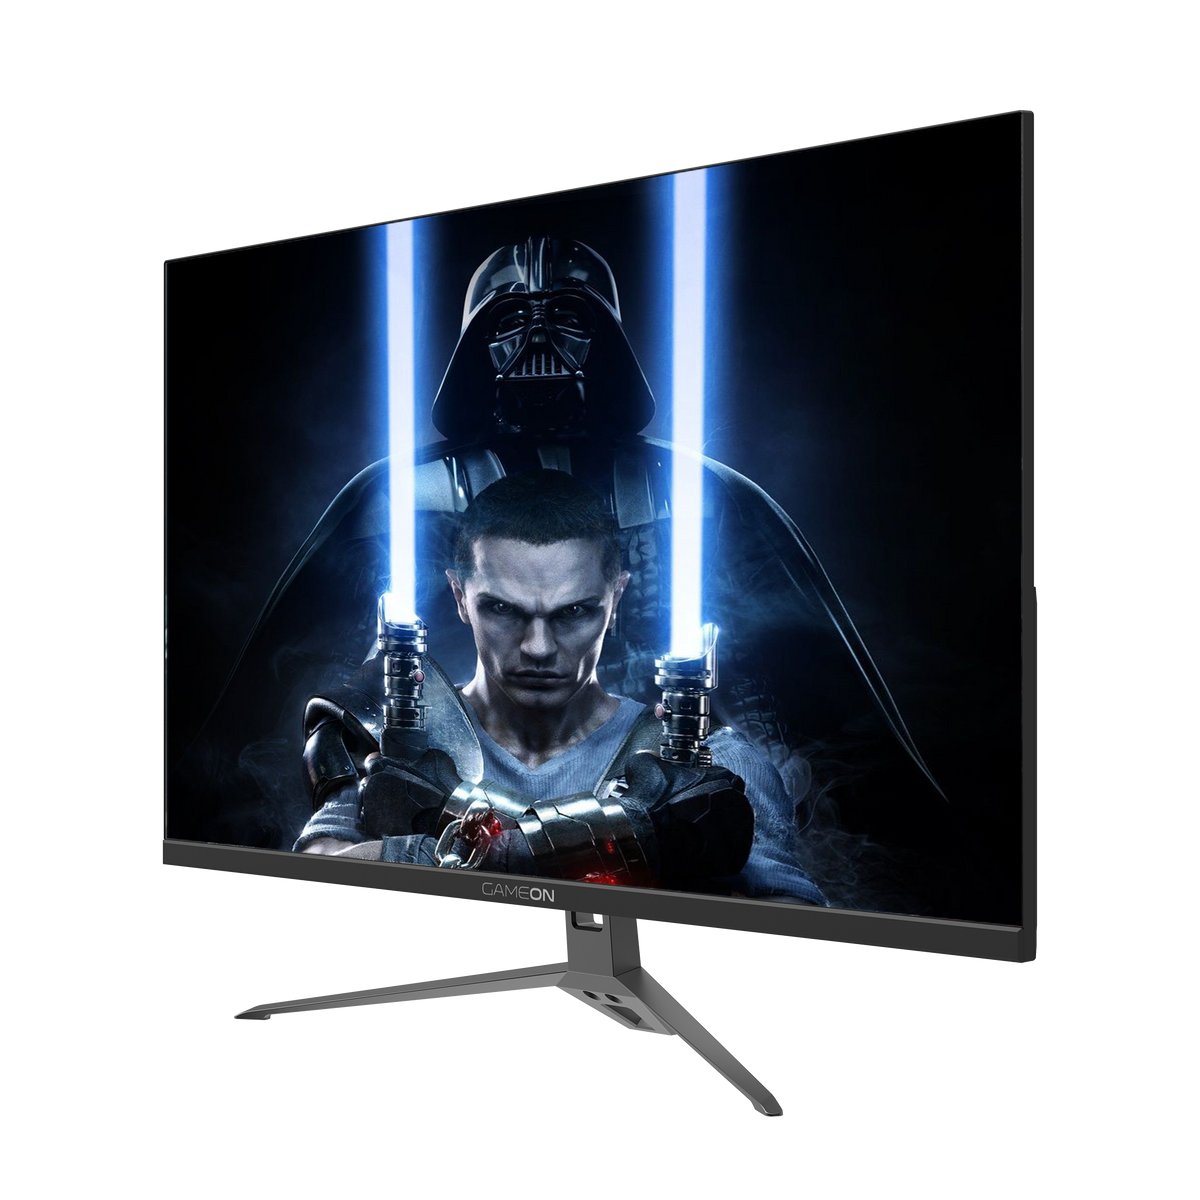 GAMEON GOVE127FHD165IPS 27" FHD, 165Hz, 1ms Flat IPS Gaming Monitor, Black - (HDMI 2.1 Console Compatible)